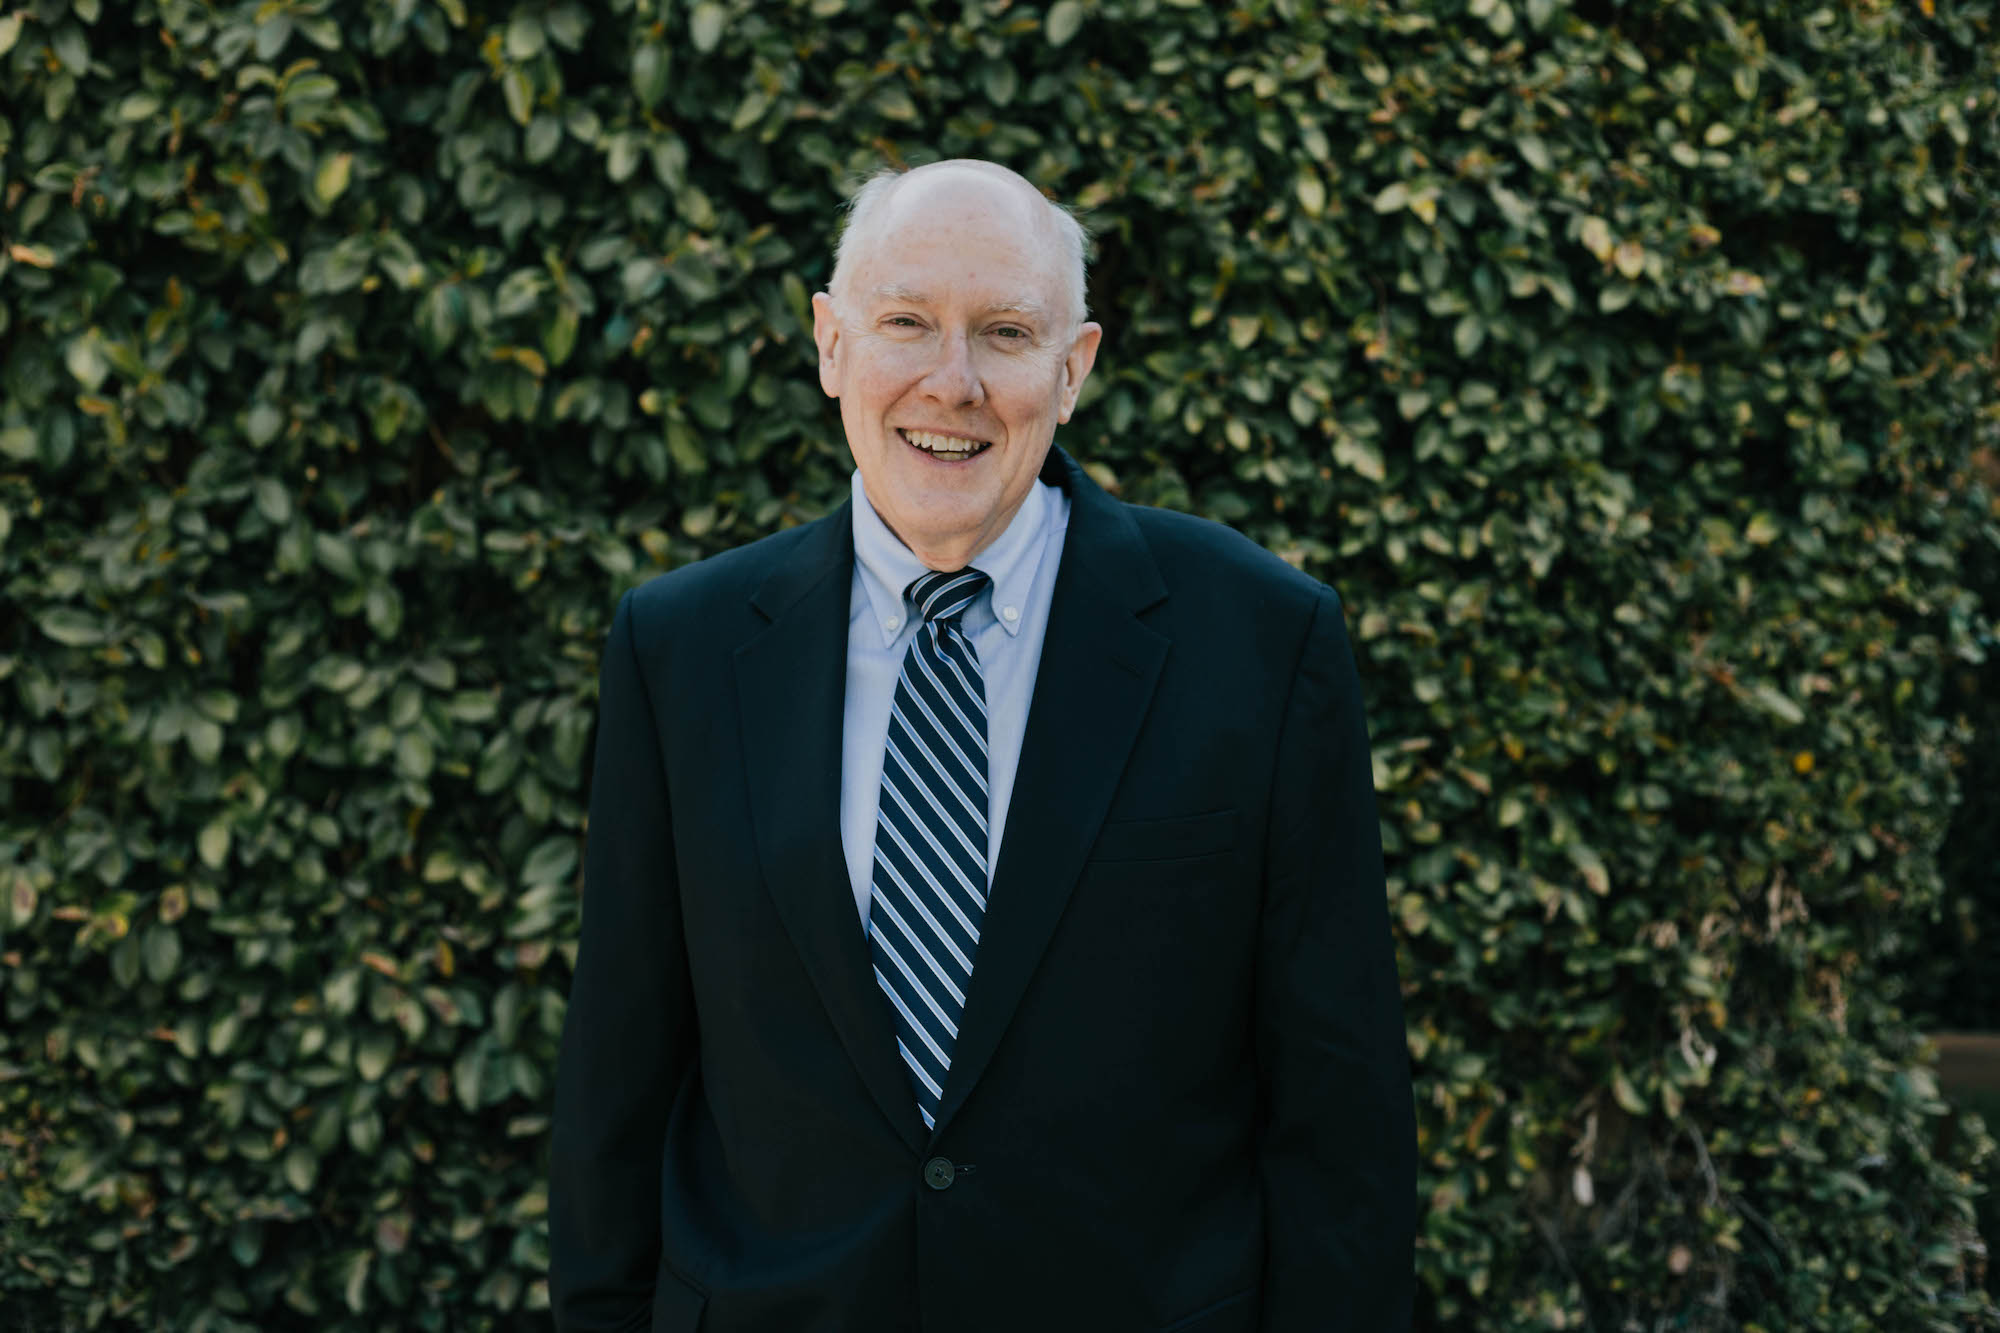 A Q&A with Music Dean Dr. Don Hedges